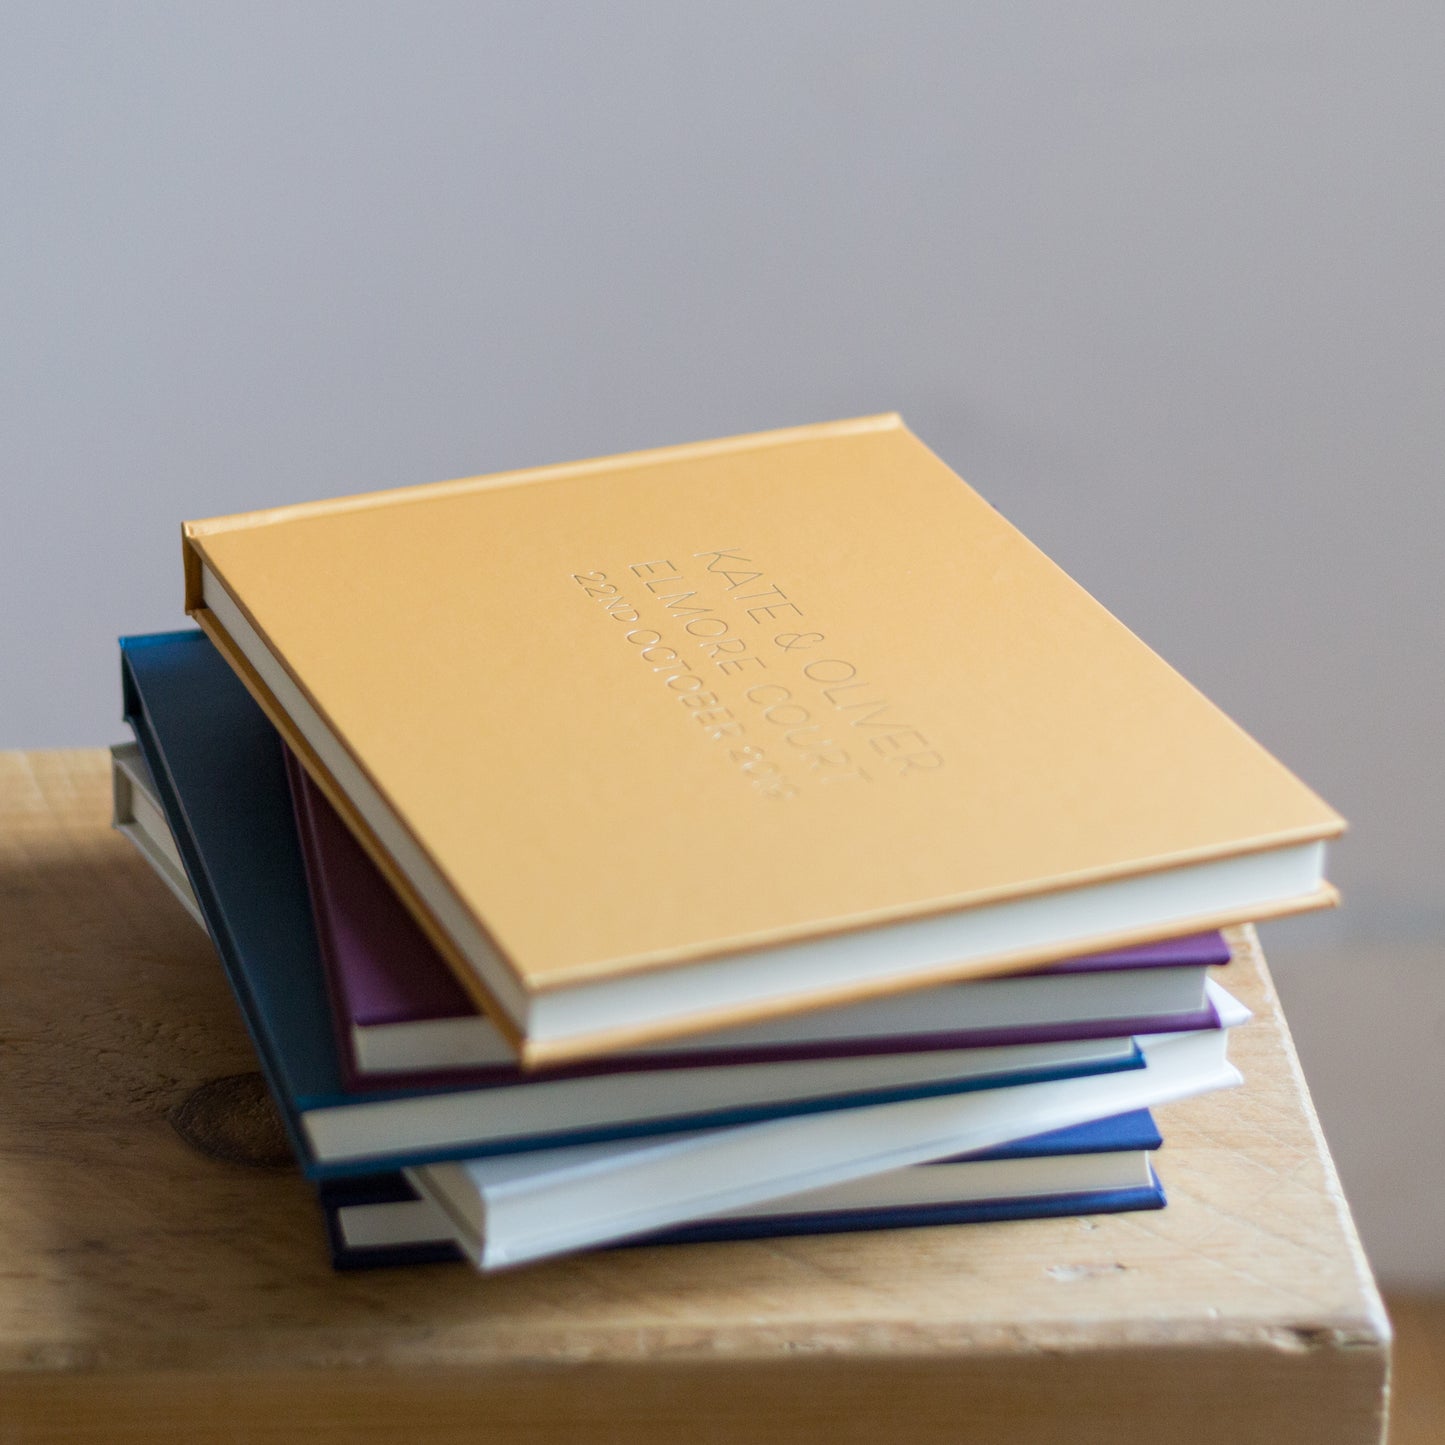 a pile of guest books are on a wooden table, a yellow one is on the top